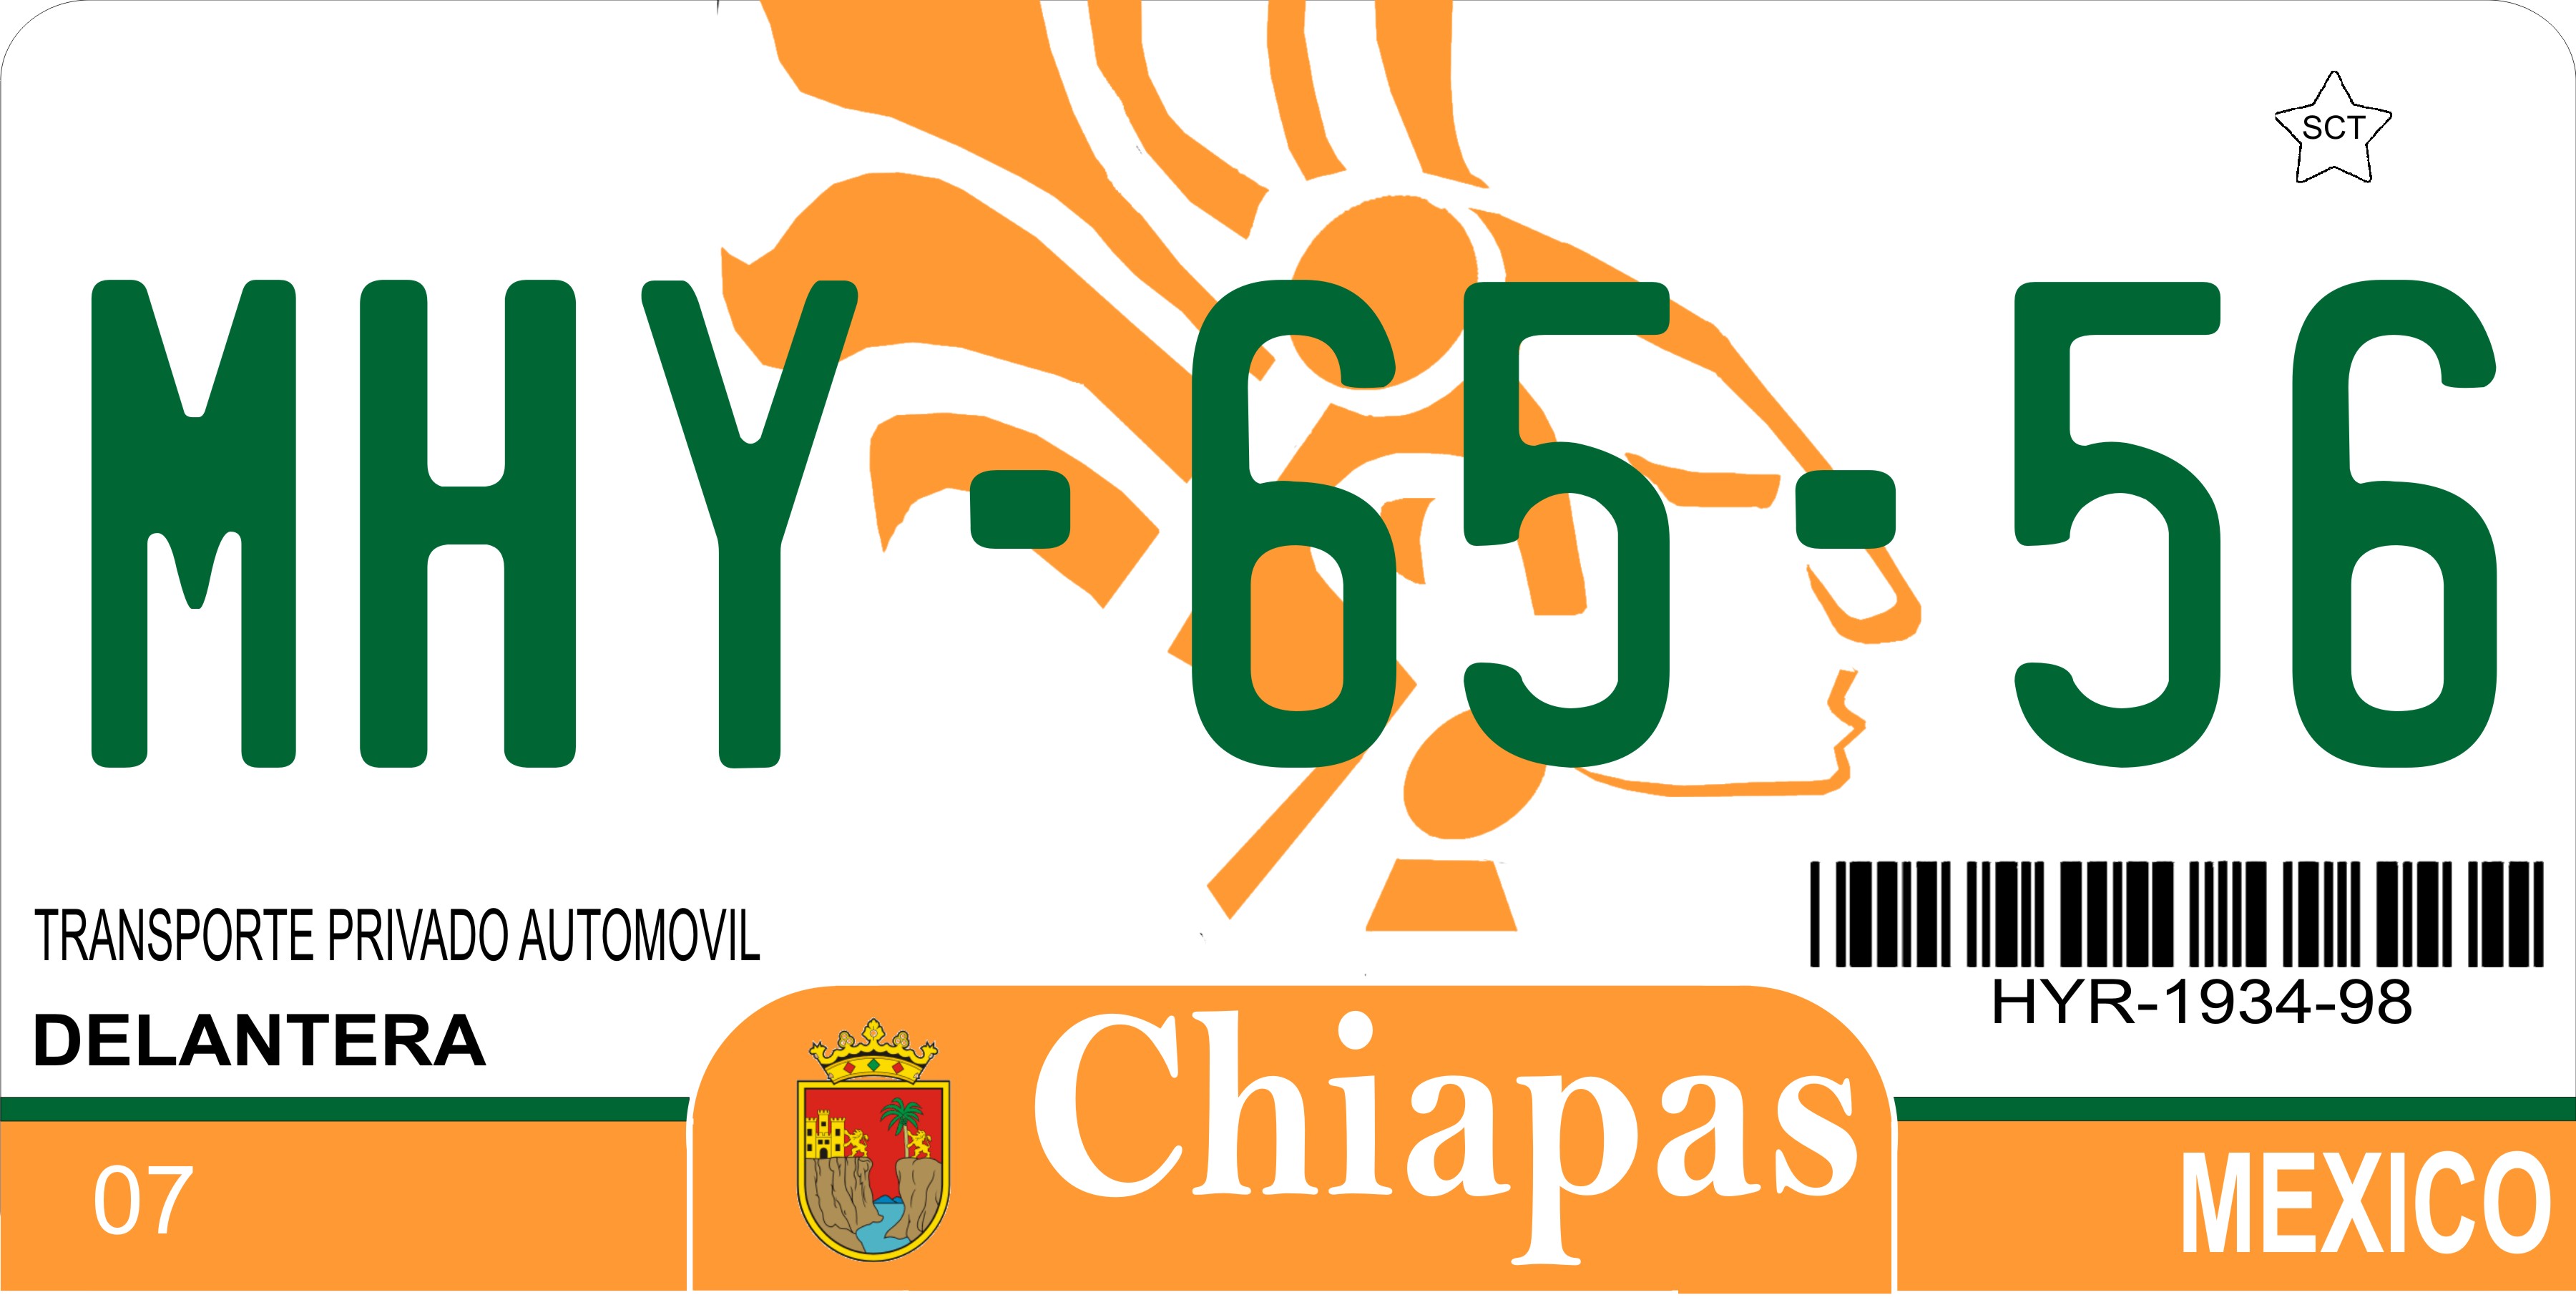 Mexico Chiapas Photo LICENSE PLATE Free Personalization on this PLATE